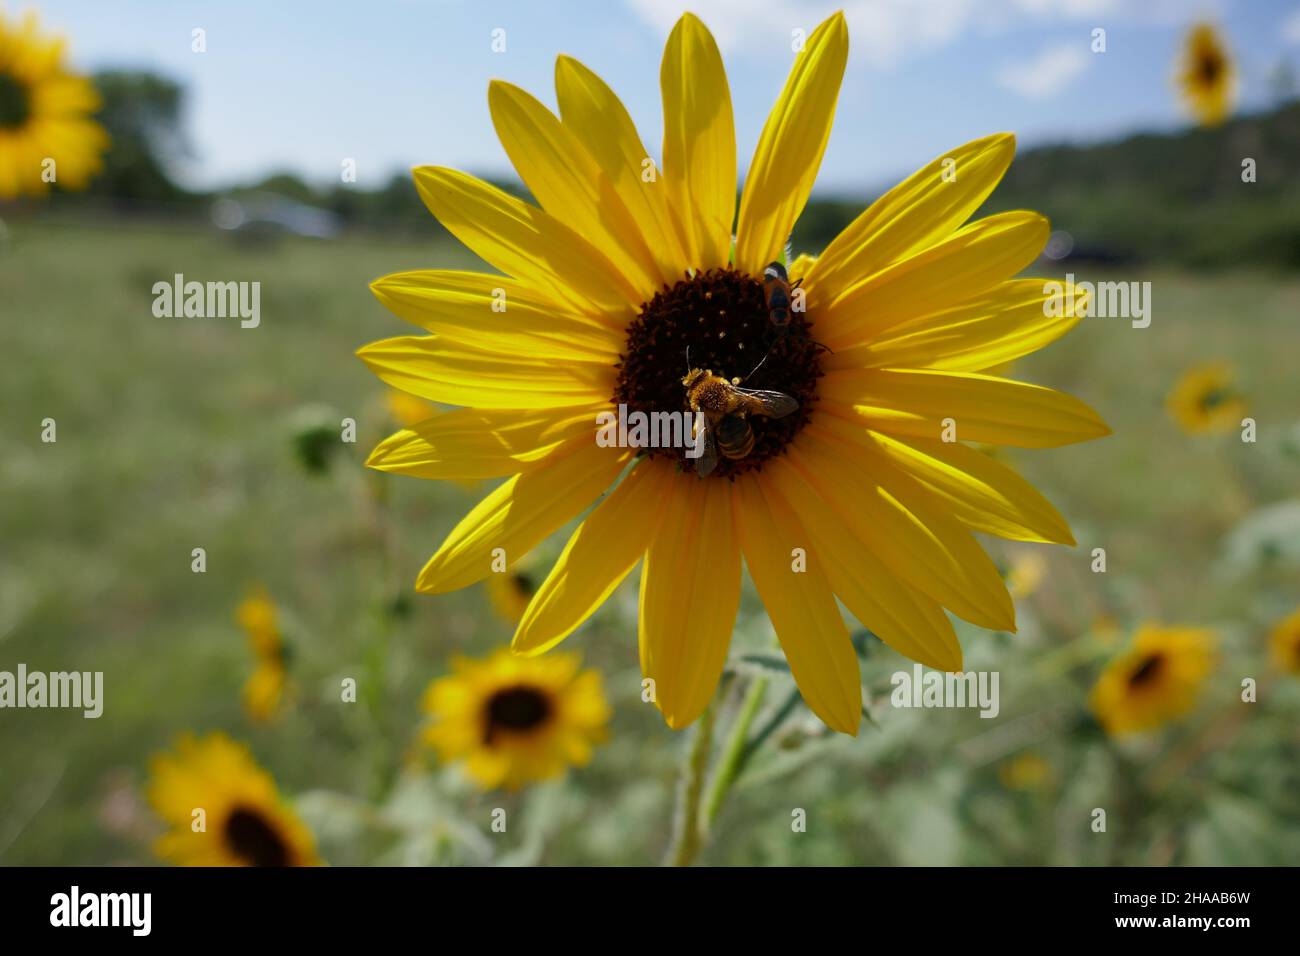 Large yellow wildflower with honeybee and field out of focus in background Stock Photo